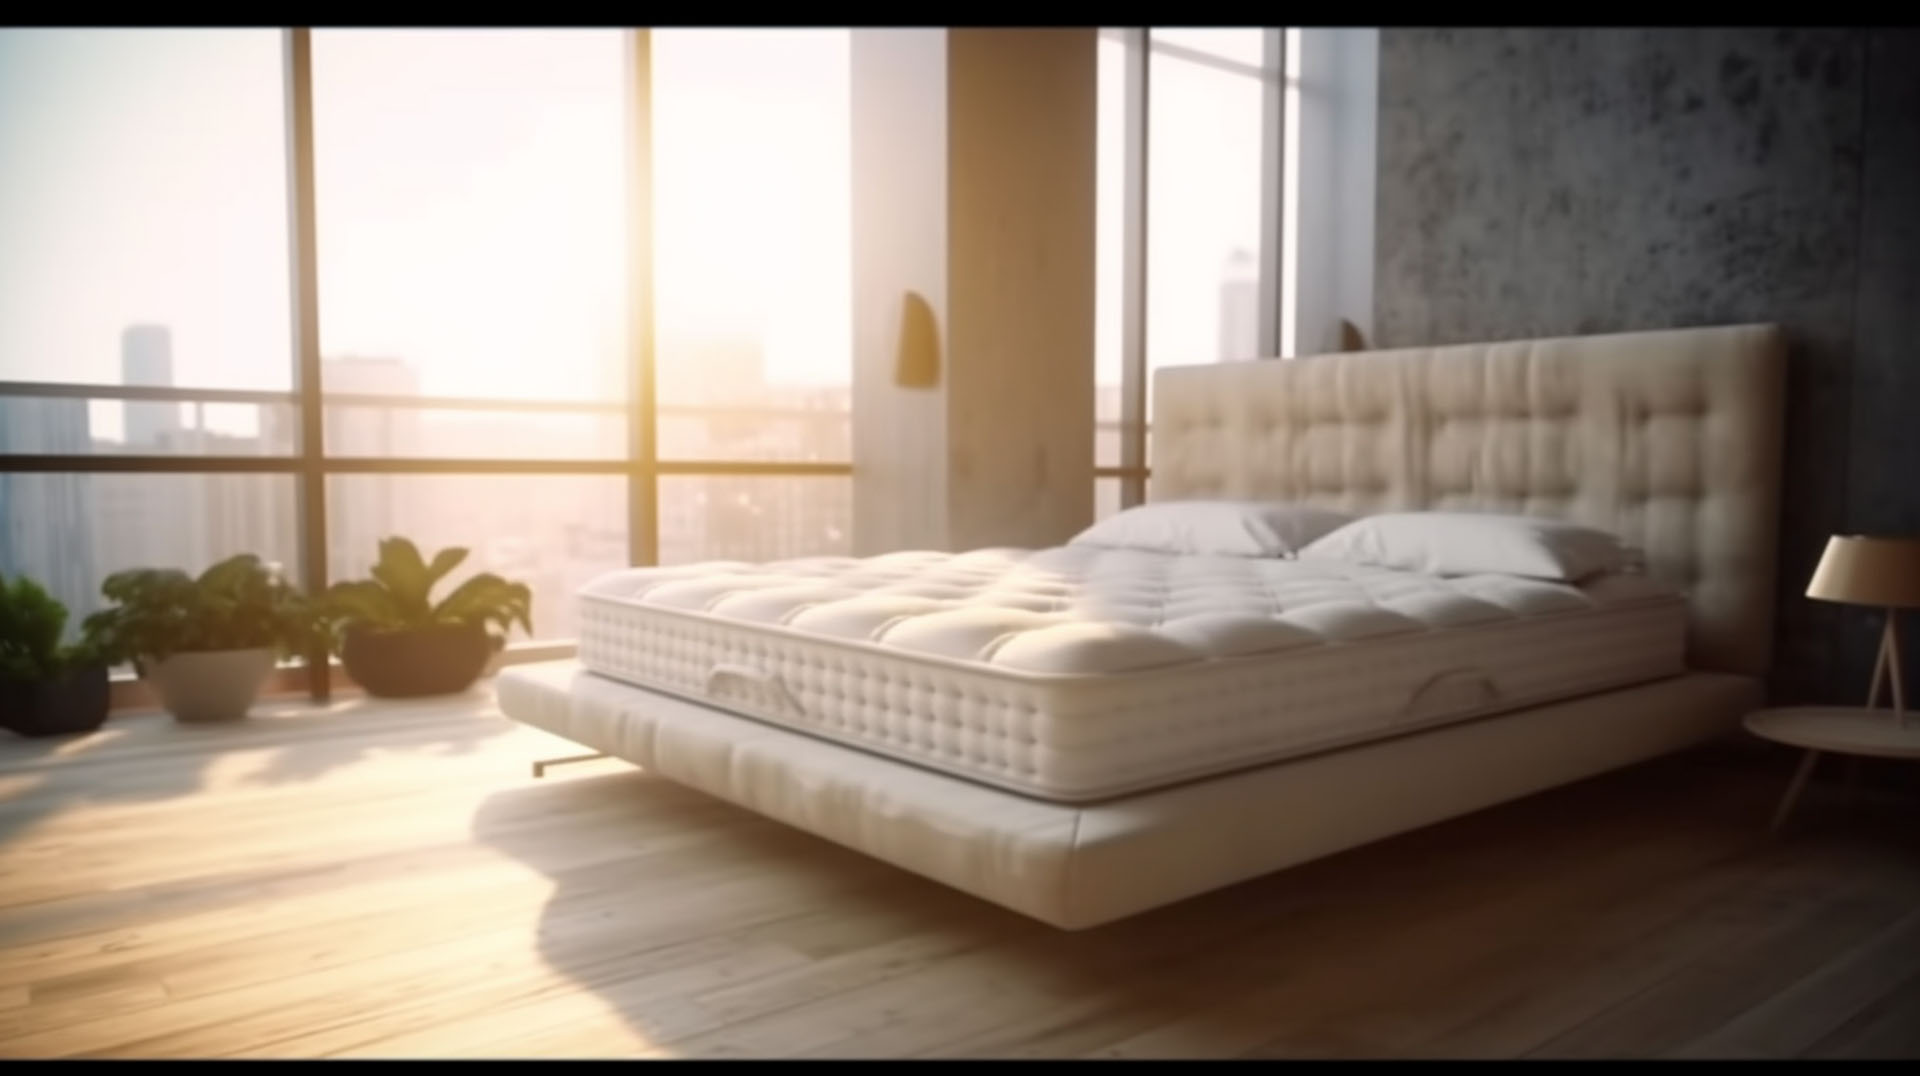 Organic mattresses are the perfect way to get a good night's sleep without sacrificing comfort or your health